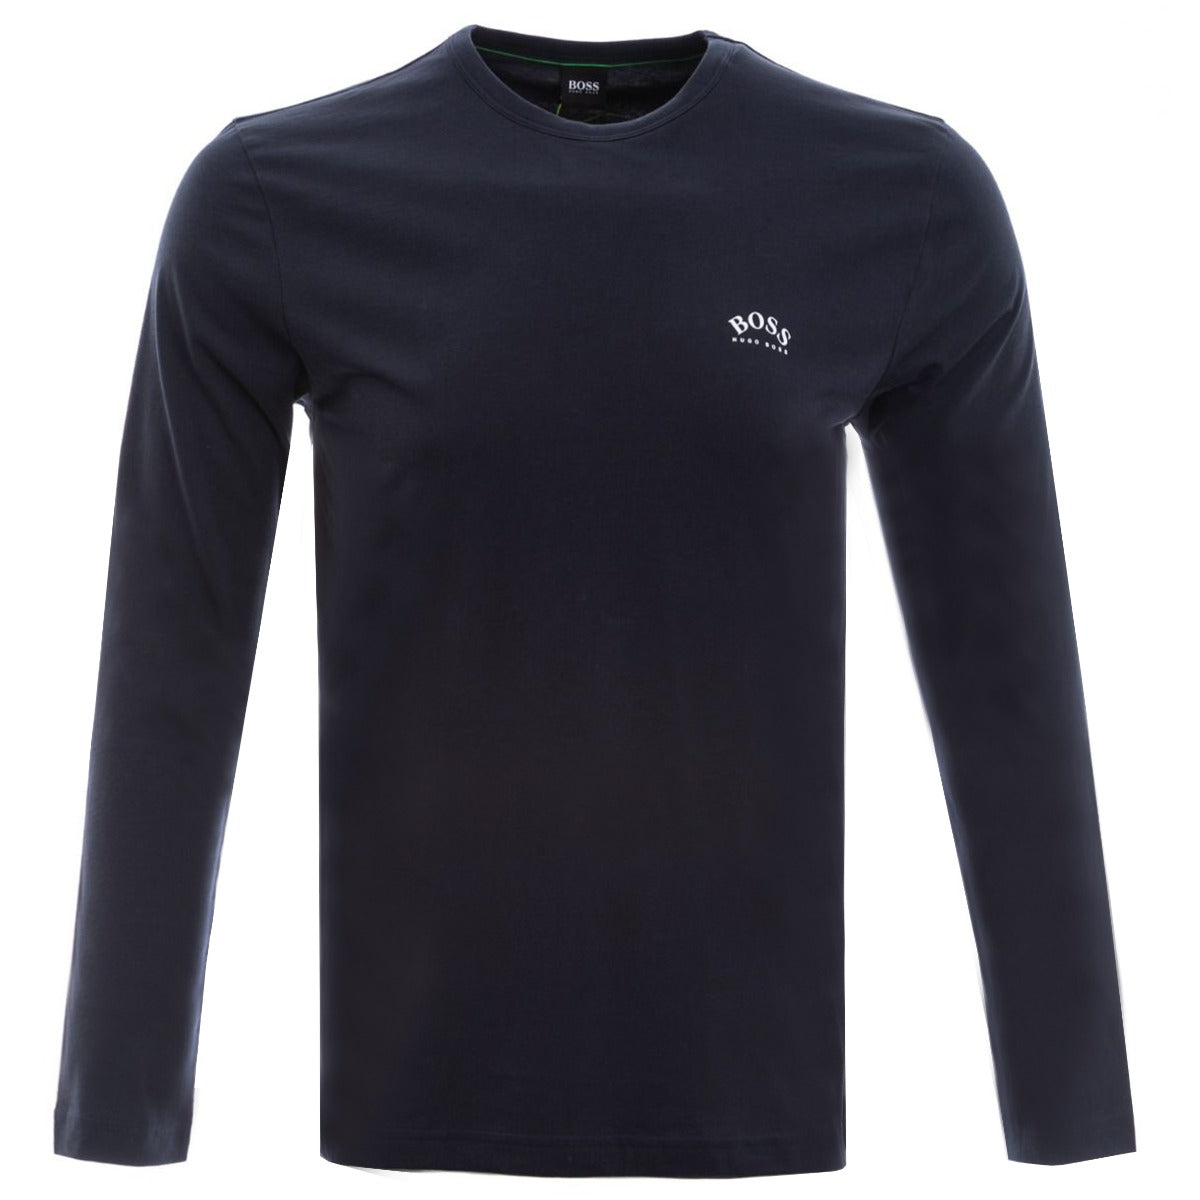 BOSS Togn Curved Long Sleeve T Shirt in Navy Main